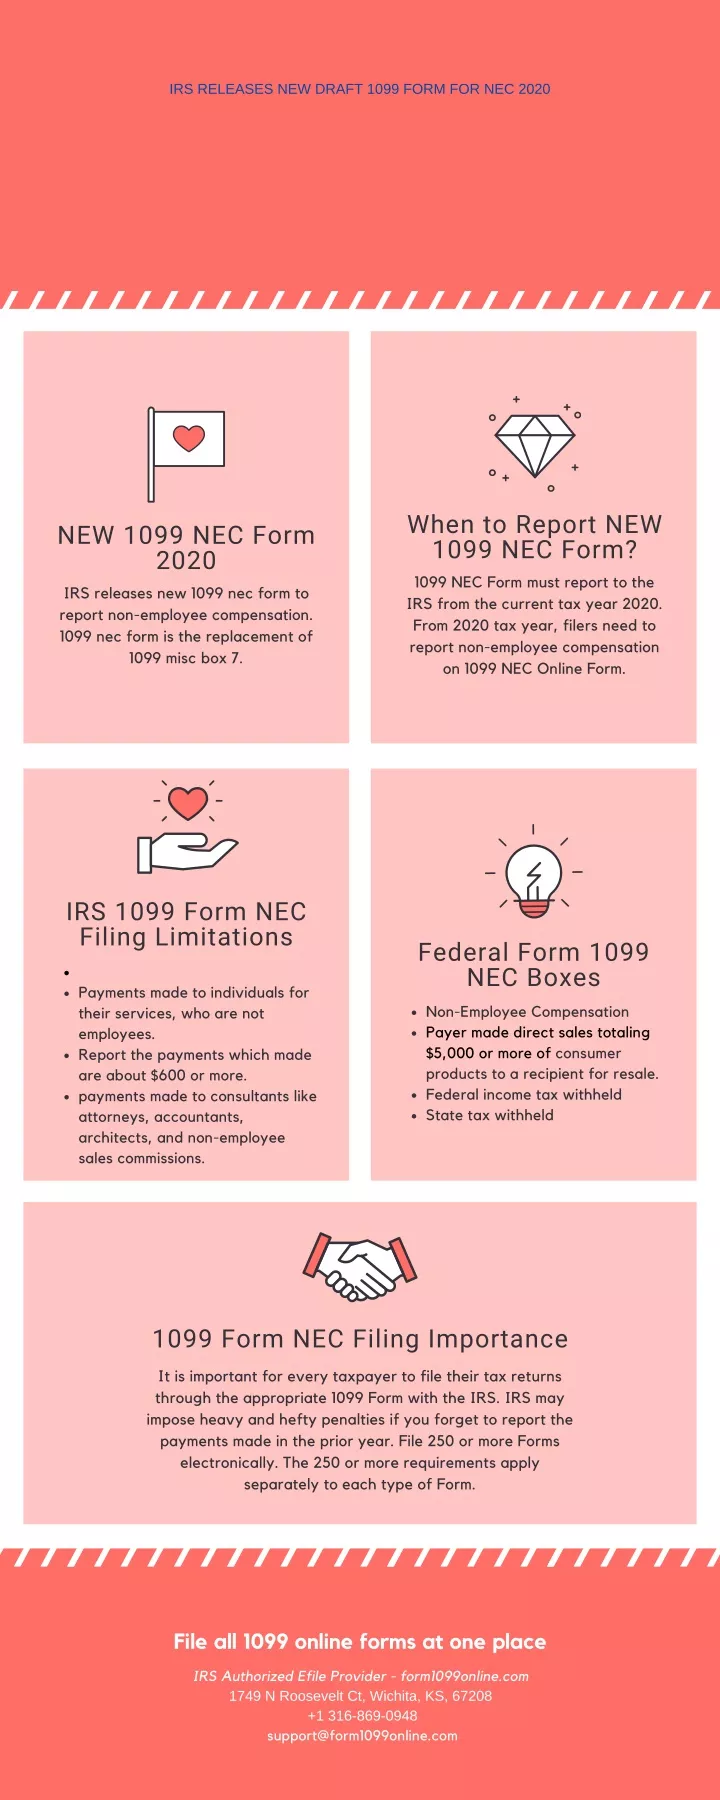 irs releases new draft 1099 form for nec 2020